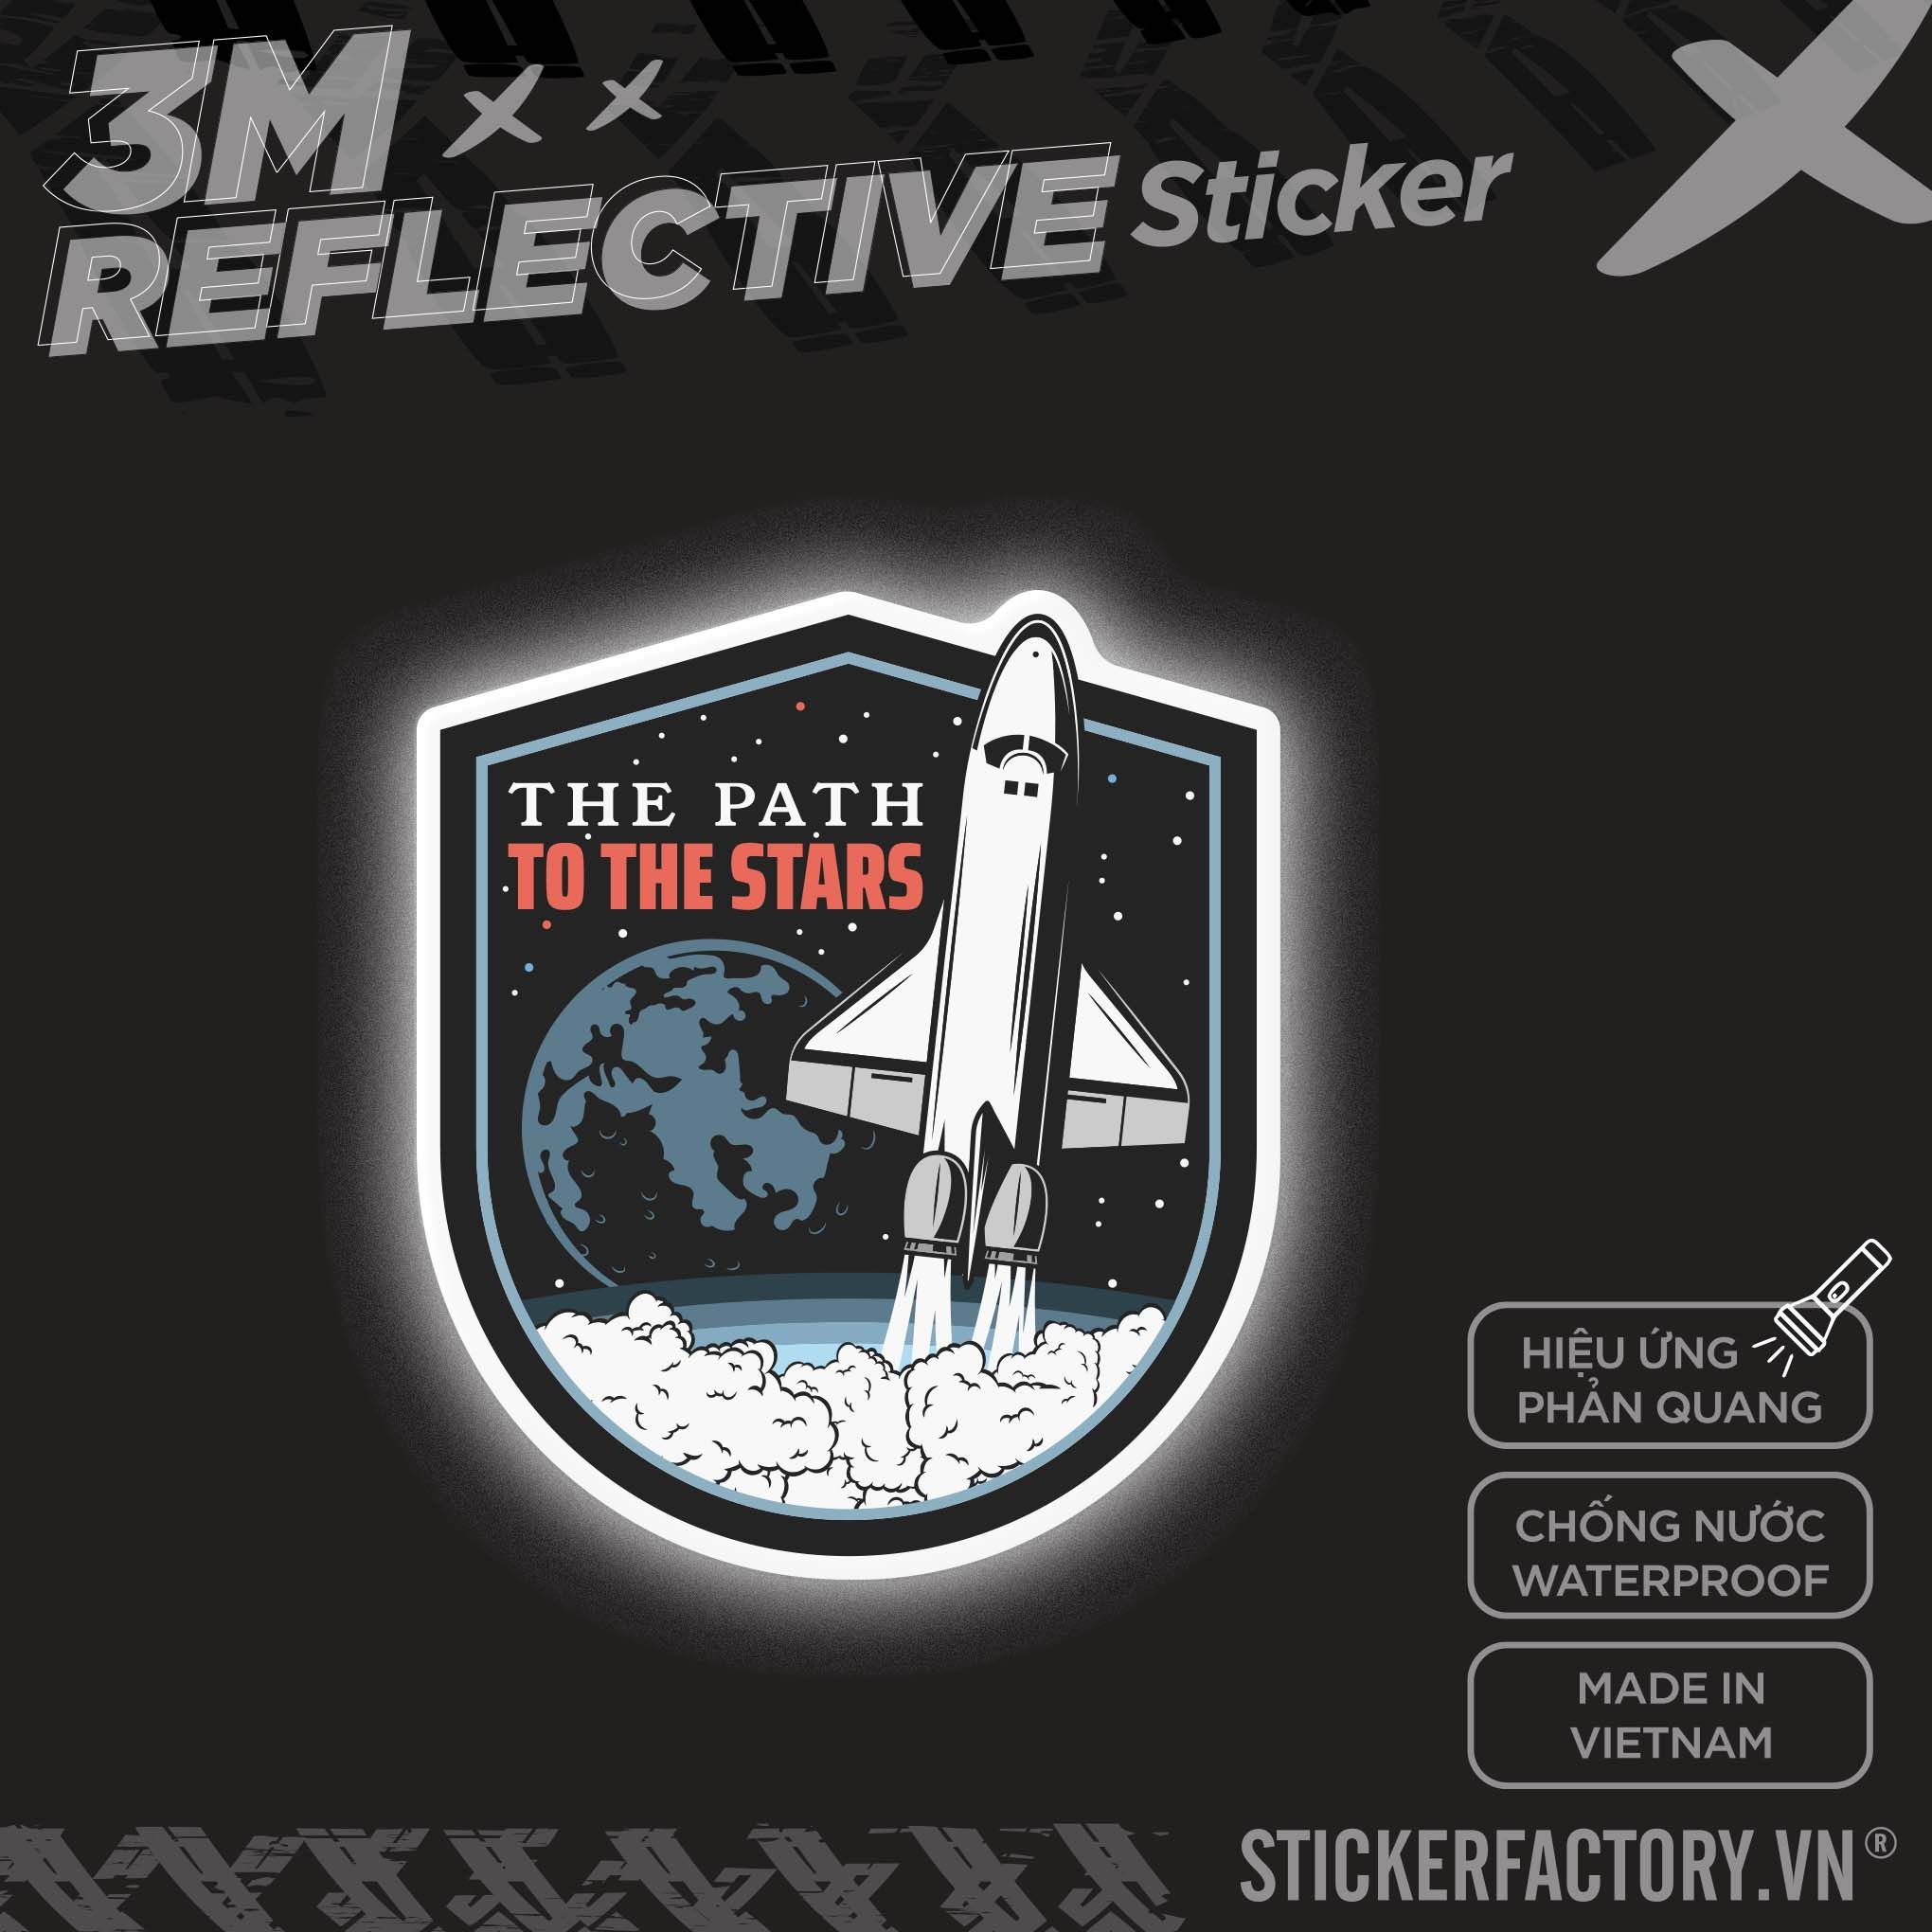 THE PATH TO THE STARS SPACE LOGO 3M - Reflective Sticker Die-cut